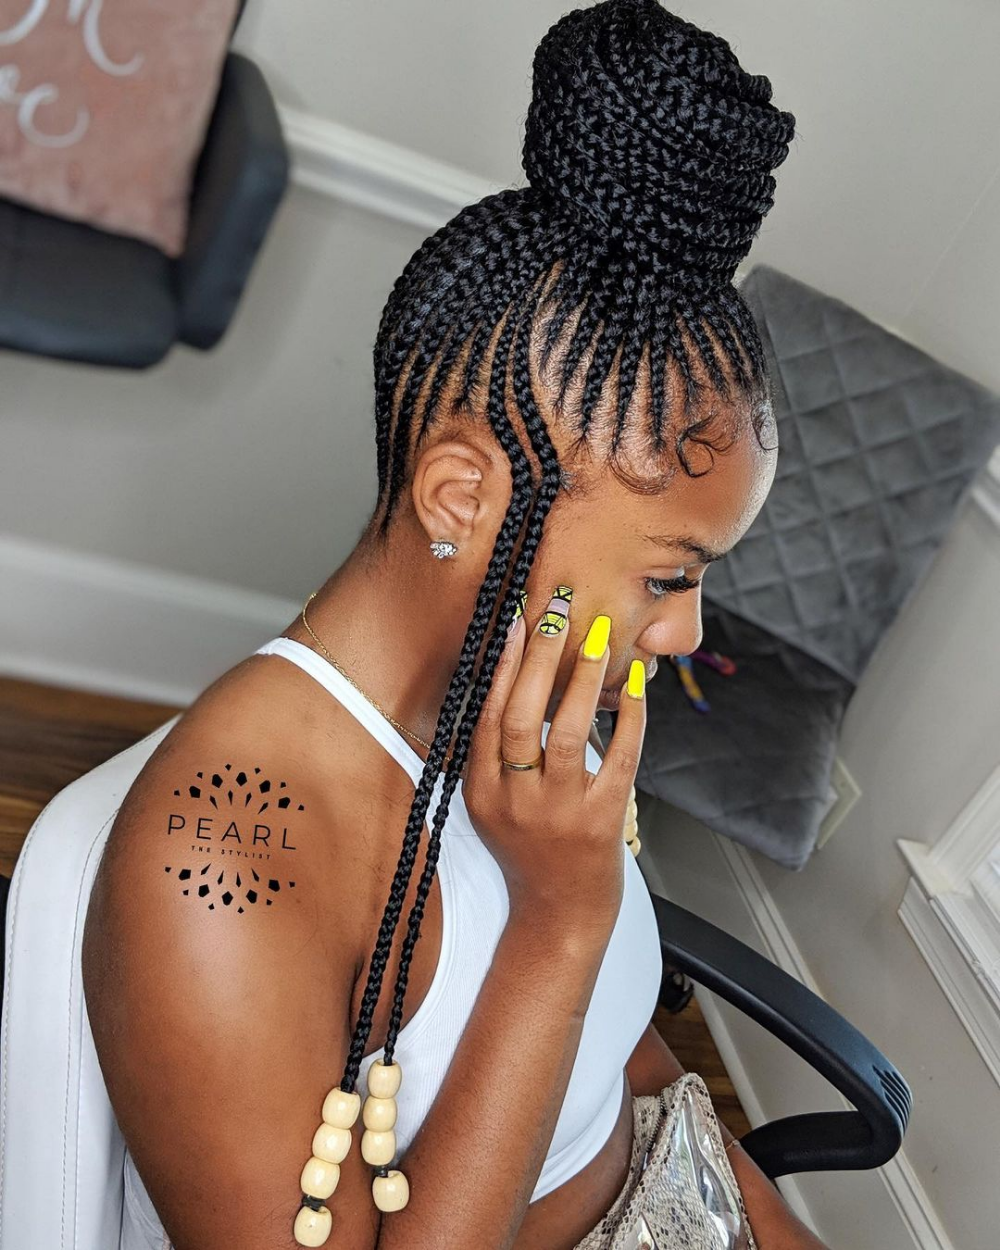 20 Beautiful Protective Styles for Short Hair